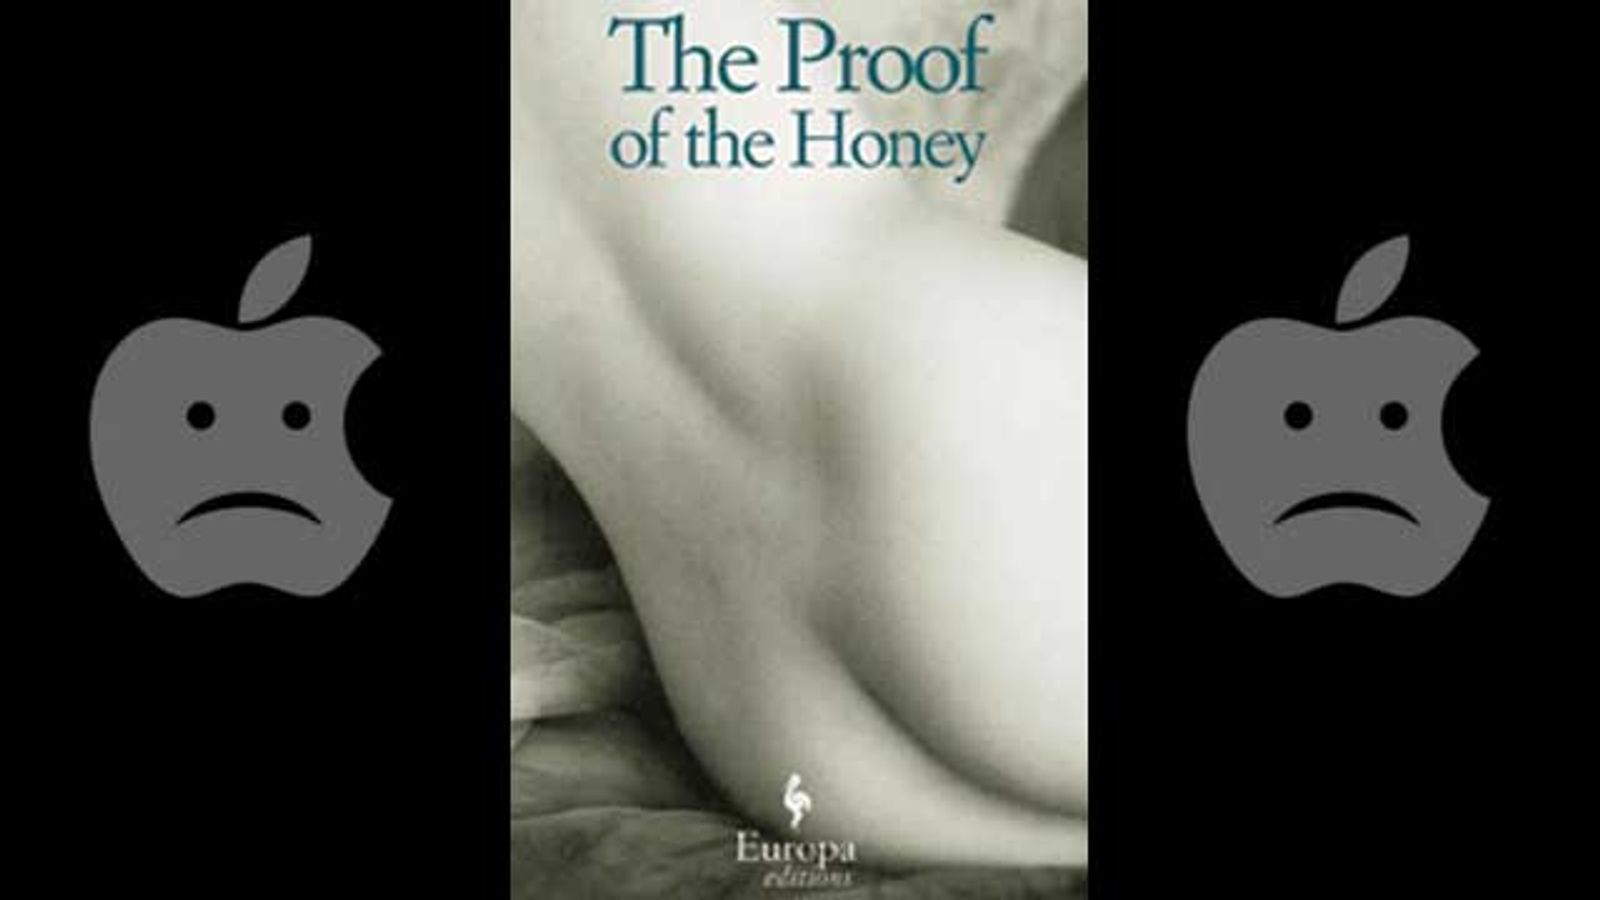 Apple (and Syria) Censor Erotic Novel with Nude Buttocks on Cover